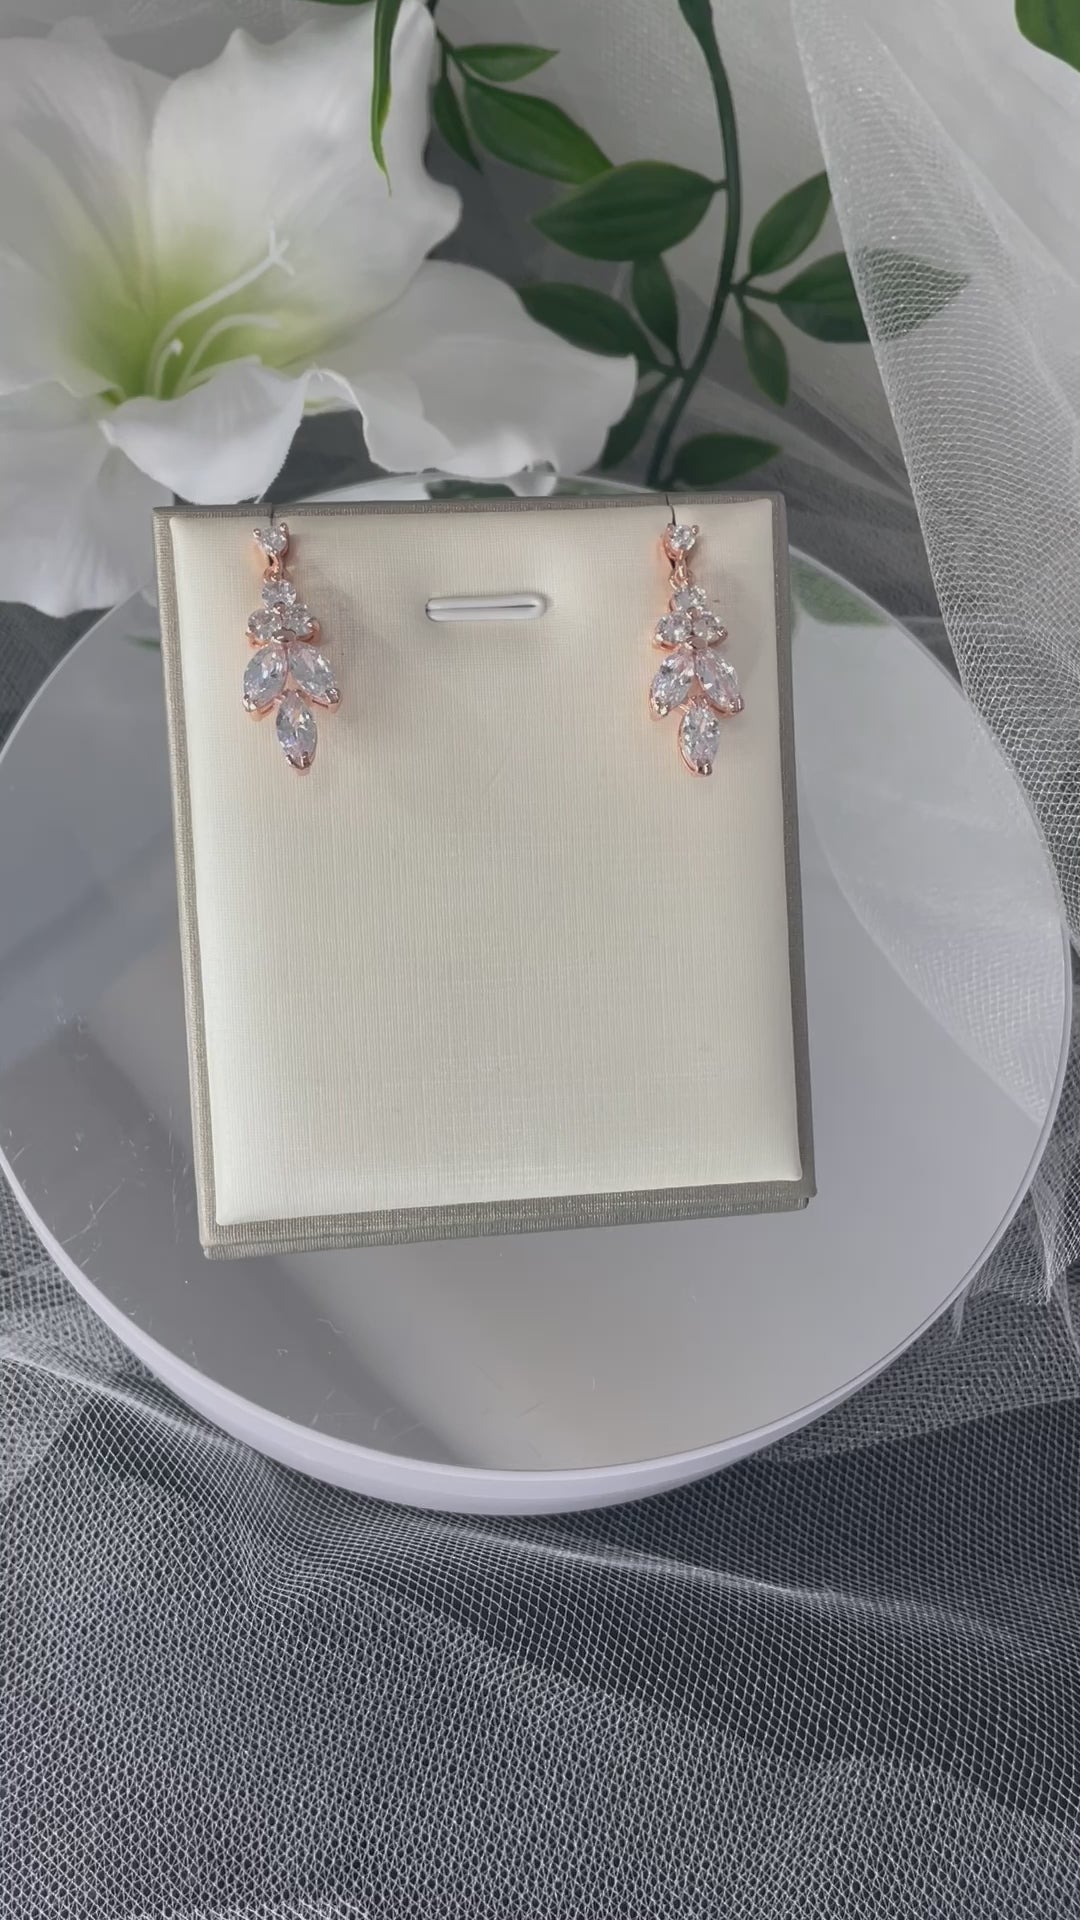 Video of All: A video showcasing the Jodie Leaf Flower Earring & Necklace Set, highlighting the elegant design and craftsmanship of both the silver and rose gold versions.